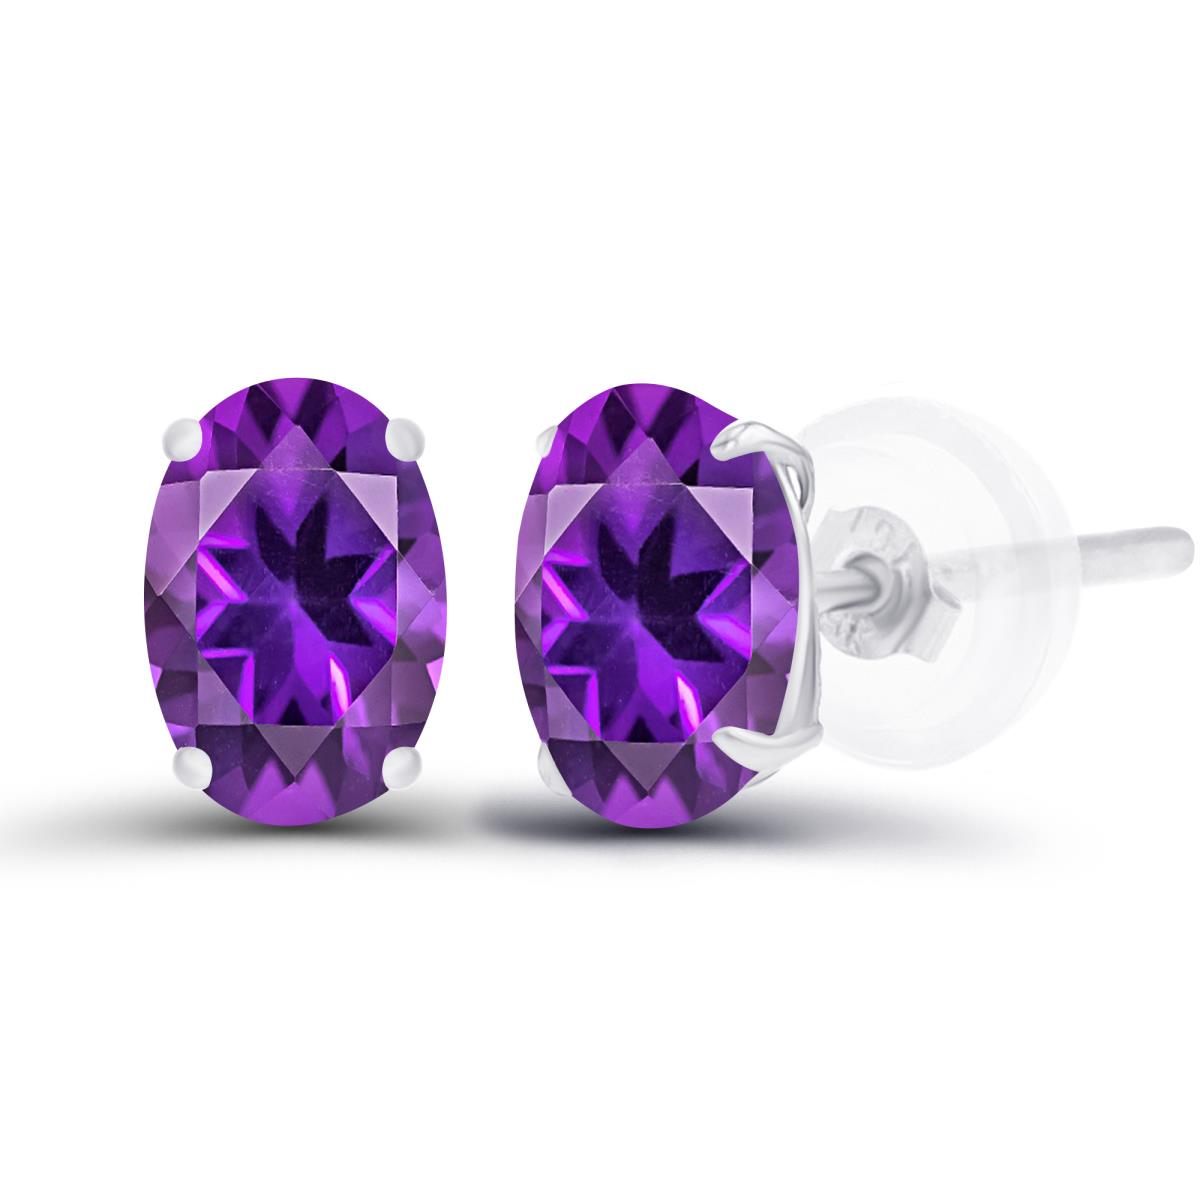 14K White Gold 6x4mm Oval Amethyst Basket Stud Earrings with Silicone Back